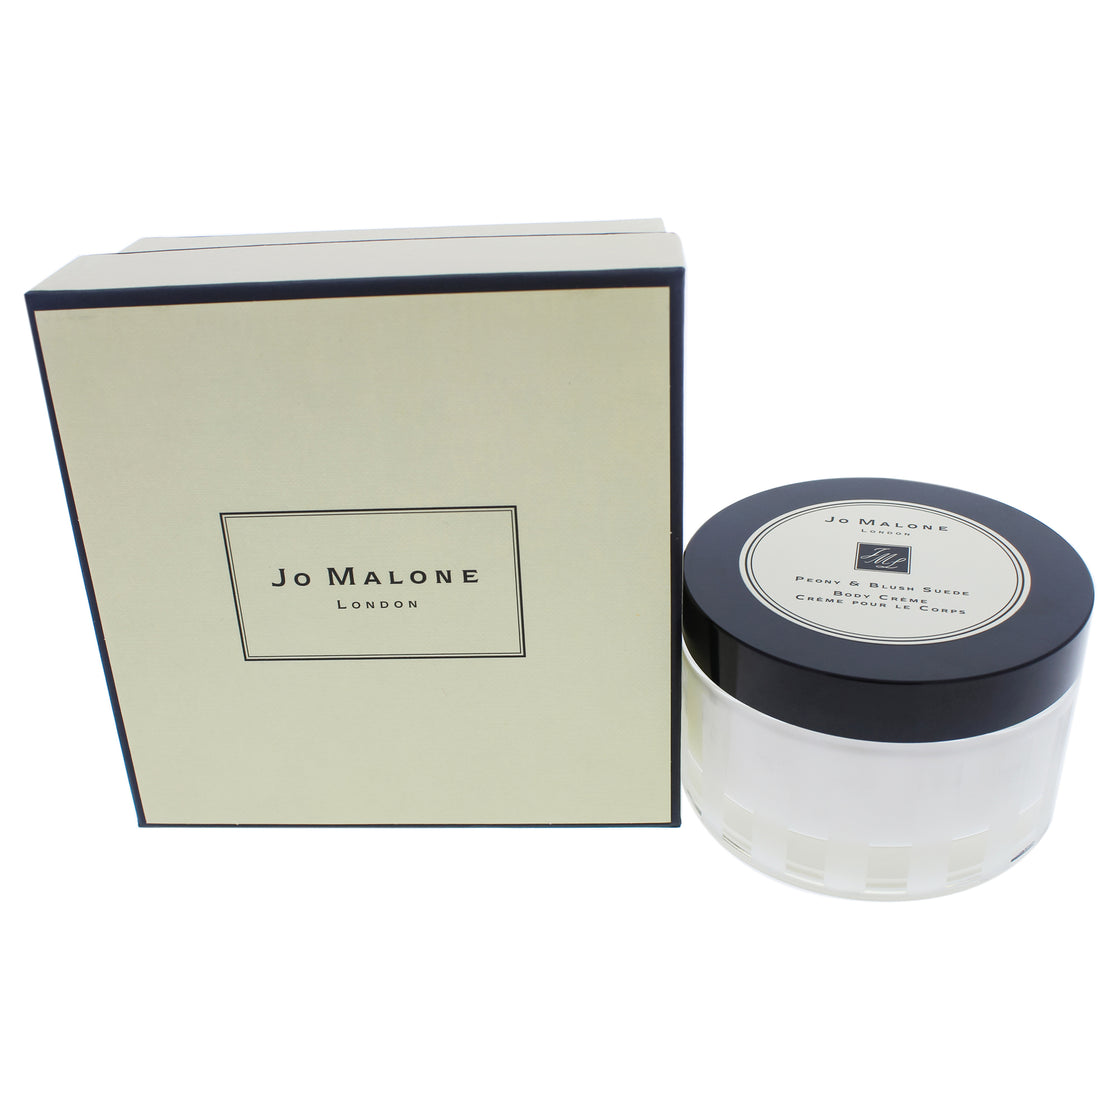 Peony and Blush Suede Body Creme by Jo Malone for Unisex - 5.9 oz Body Cream